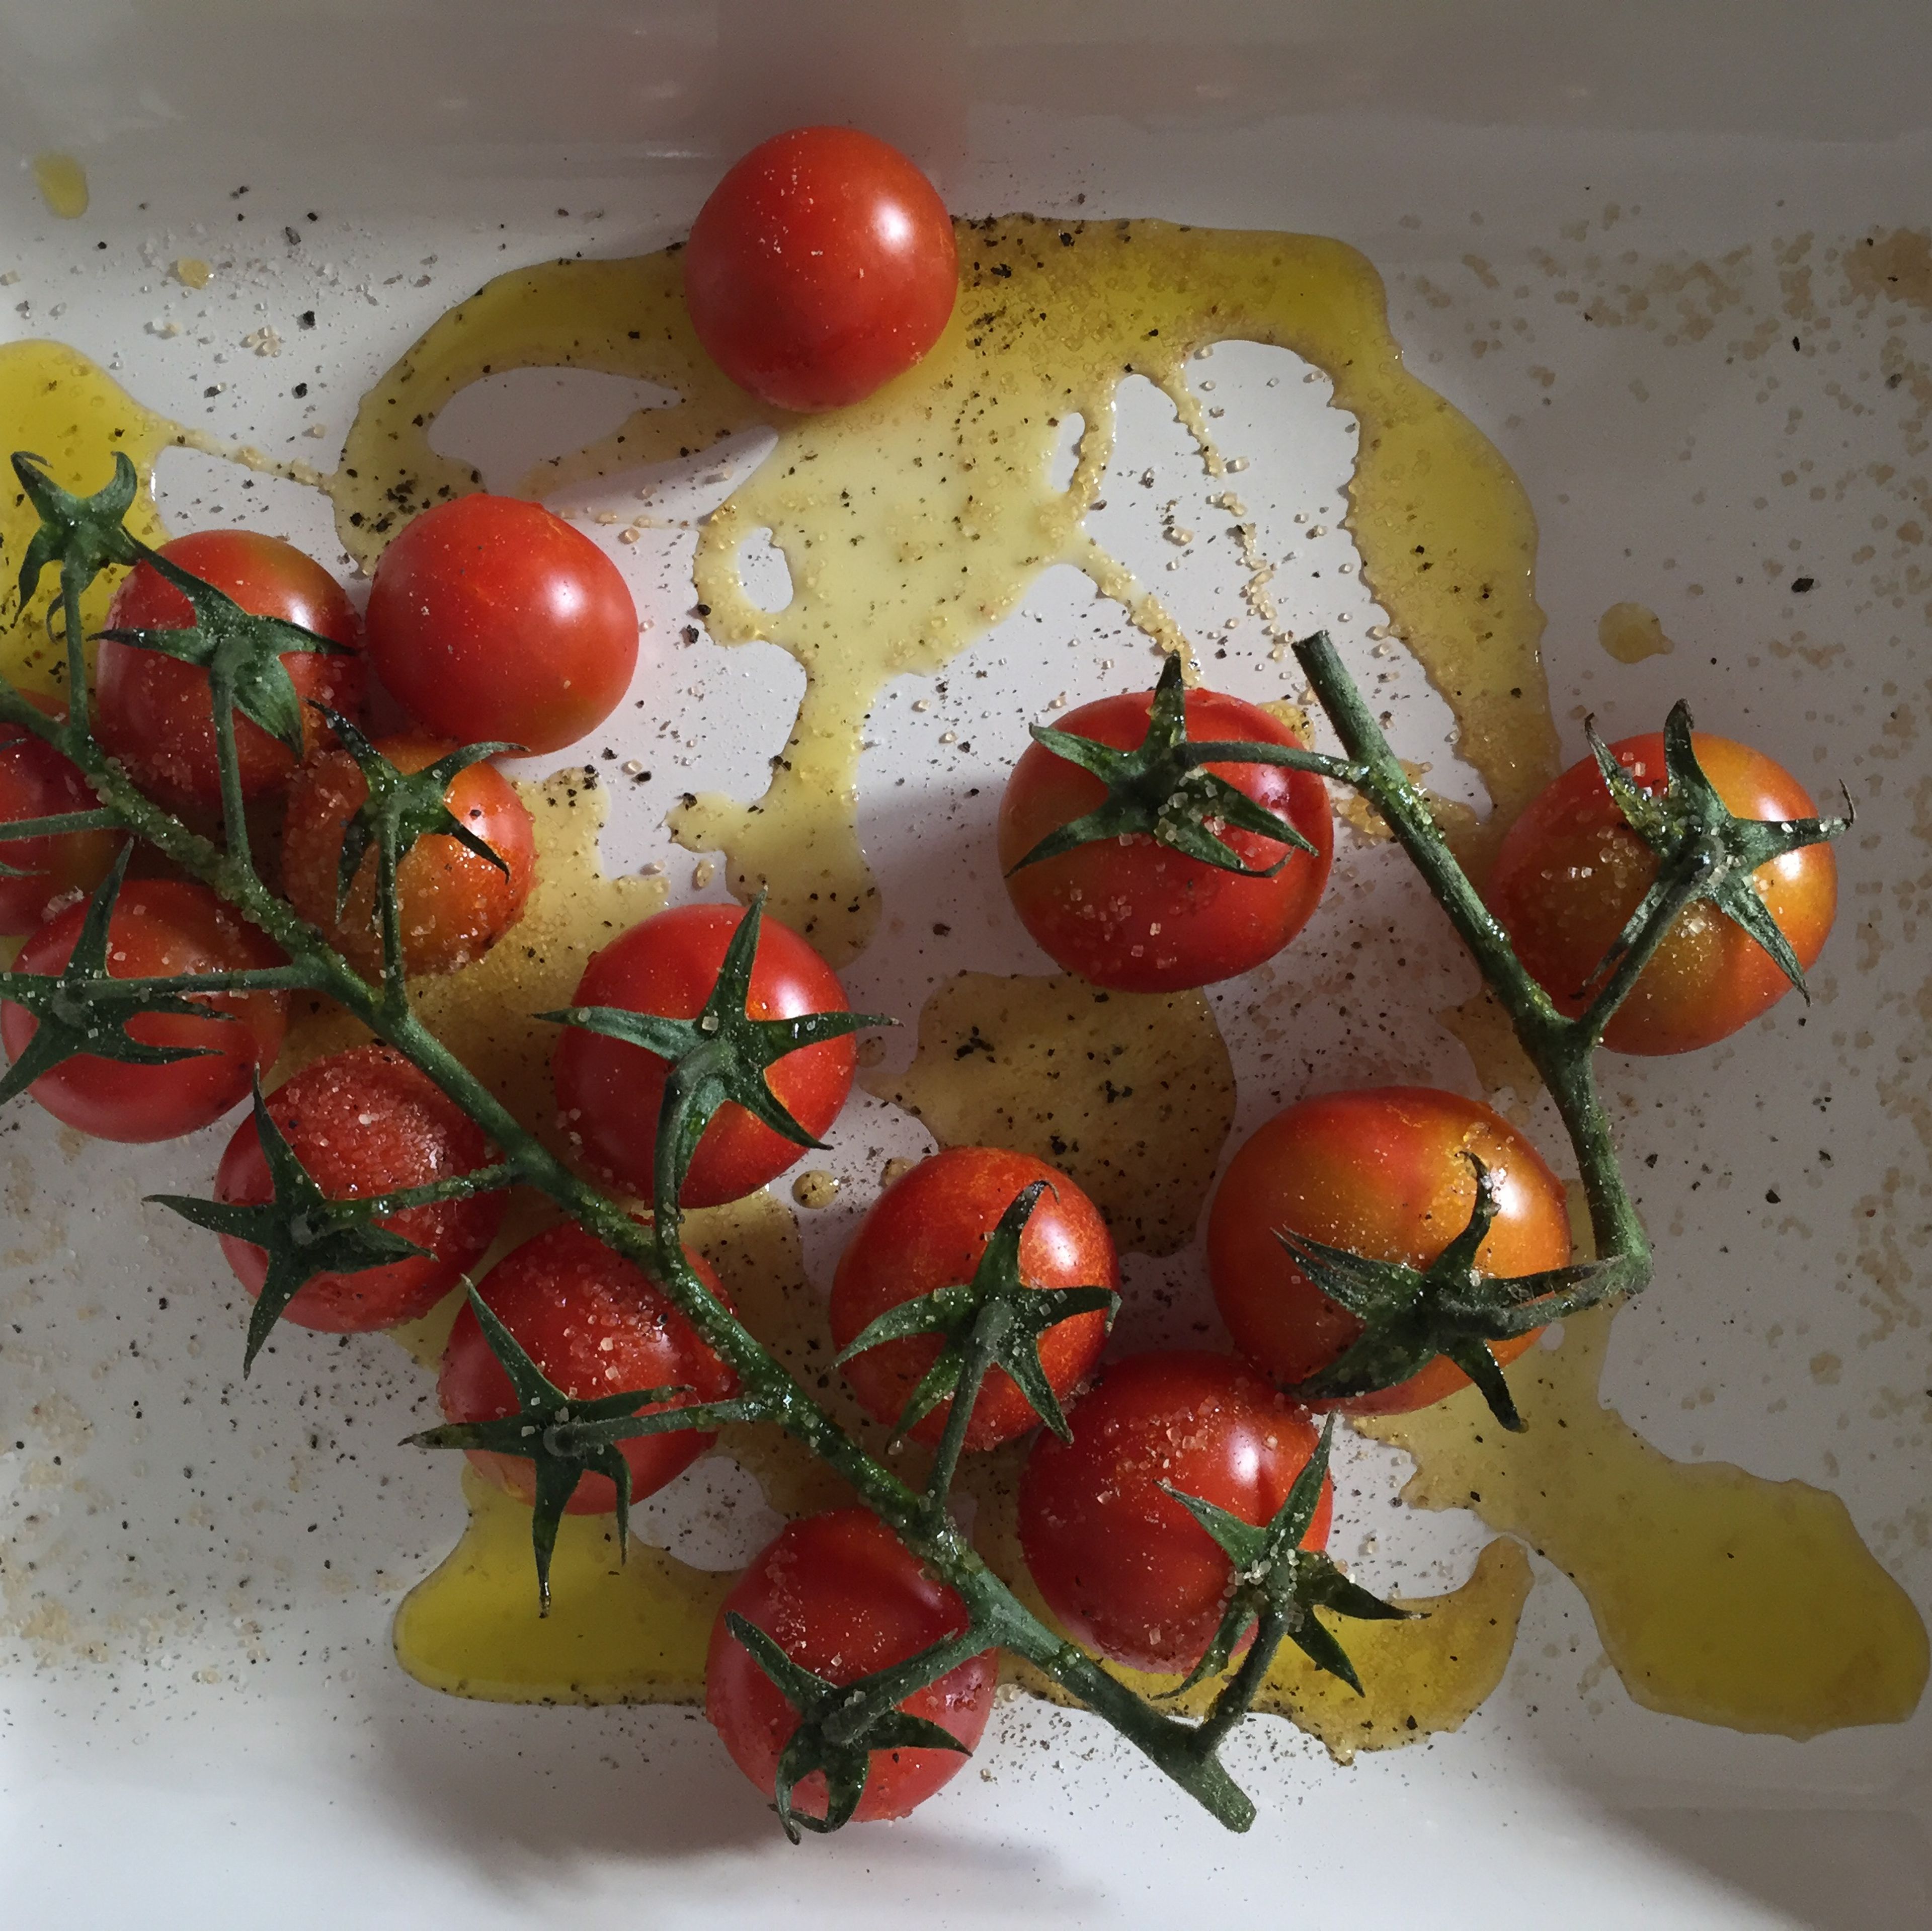 Mix tomatoes in a baking dish with 8 tbsp oil, sugar, salt, and pepper. Bake in the oven at 175°C/350°F for 20 min.